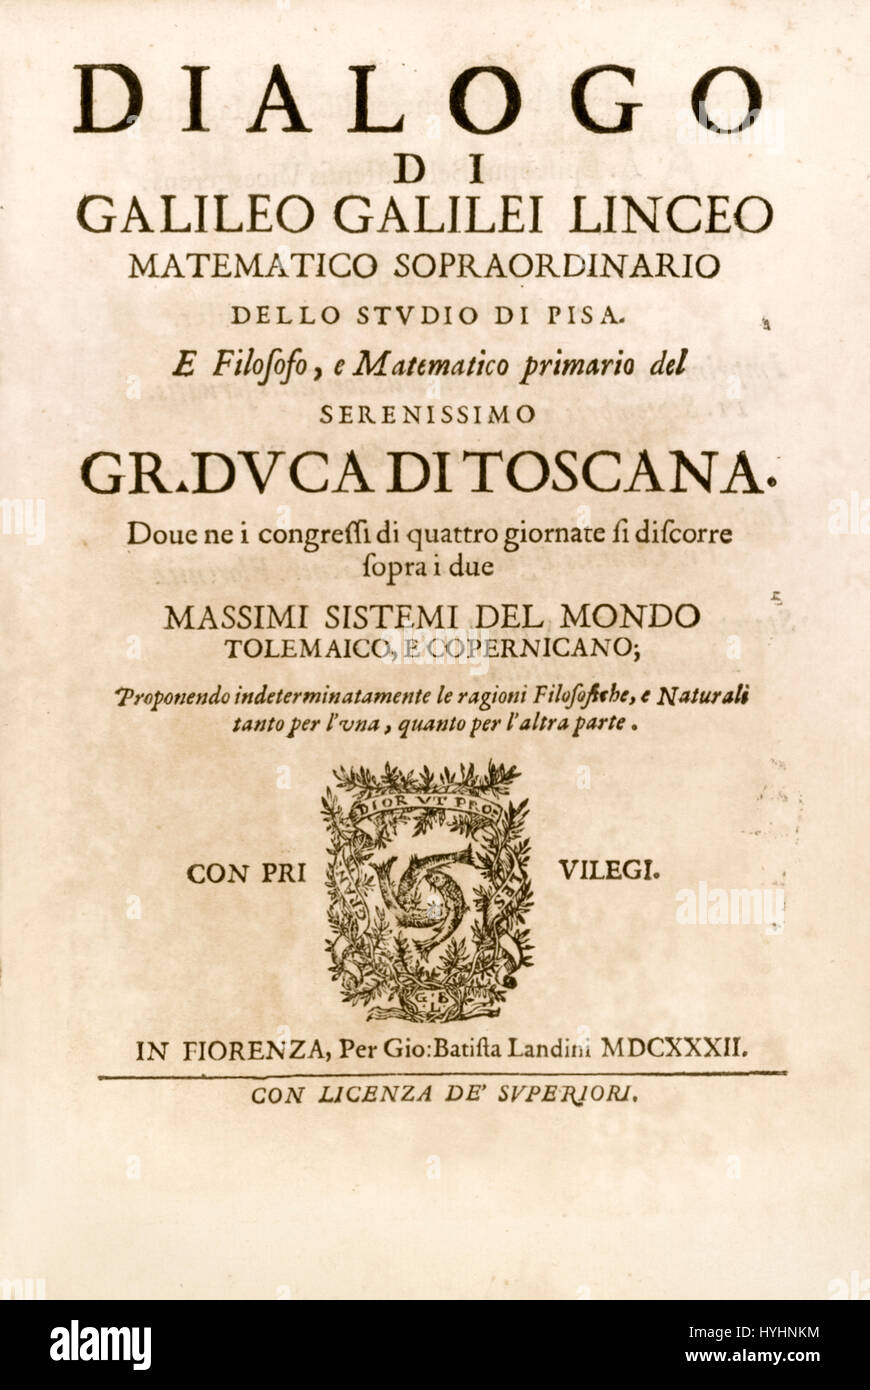 Title page from ‘Dialogo di Galileo Galilei Linceo, matematico sopra ordinario’ (Dialogue Concerning the Two Chief World Systems) by Galileo Galilei (1564-1642) Italian polymath in which he considers the merits of Copernican heliocentrism and Ptolemaic system published in 1632. Stock Photo